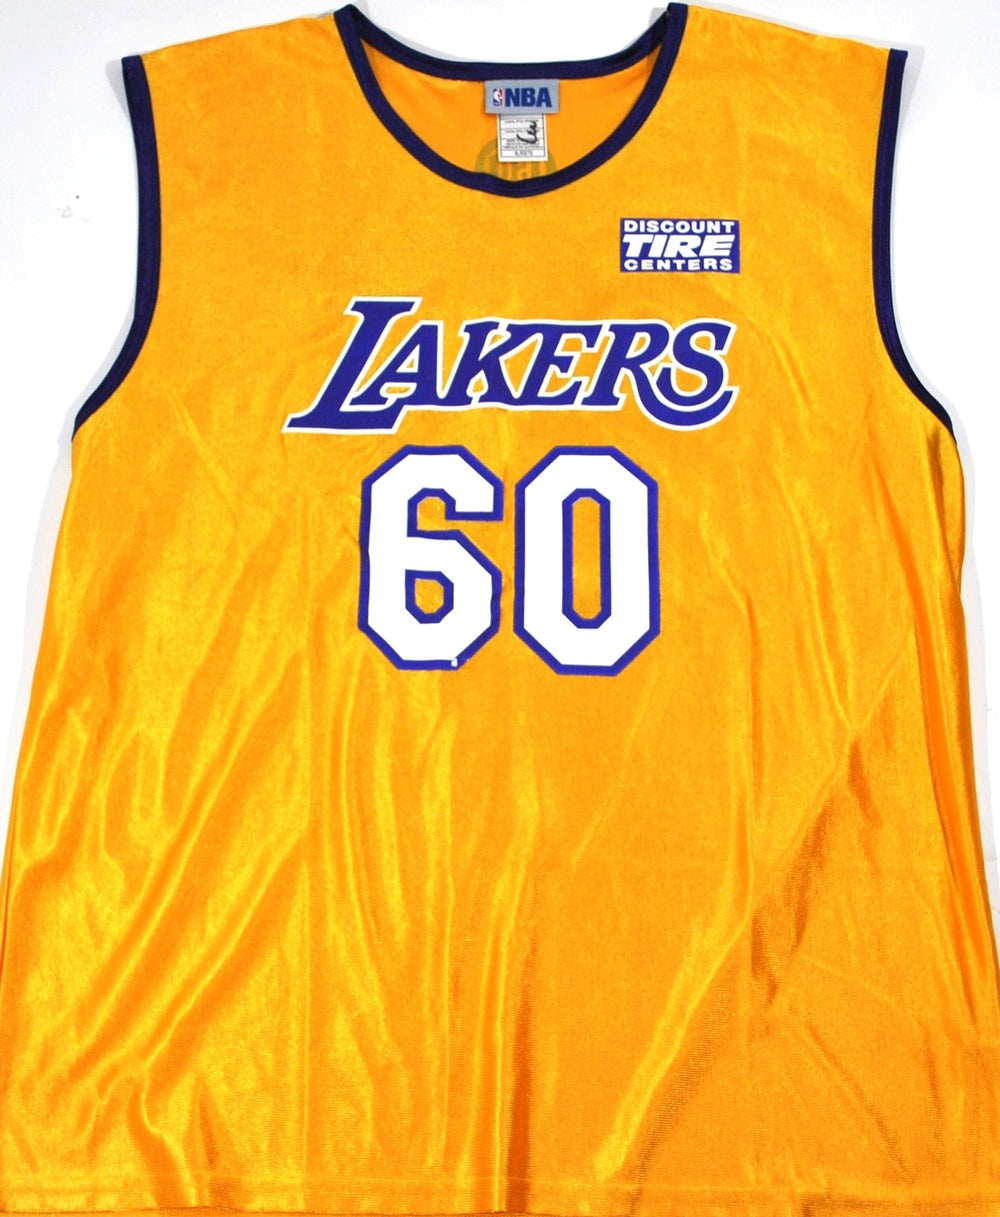 60s lakers jersey